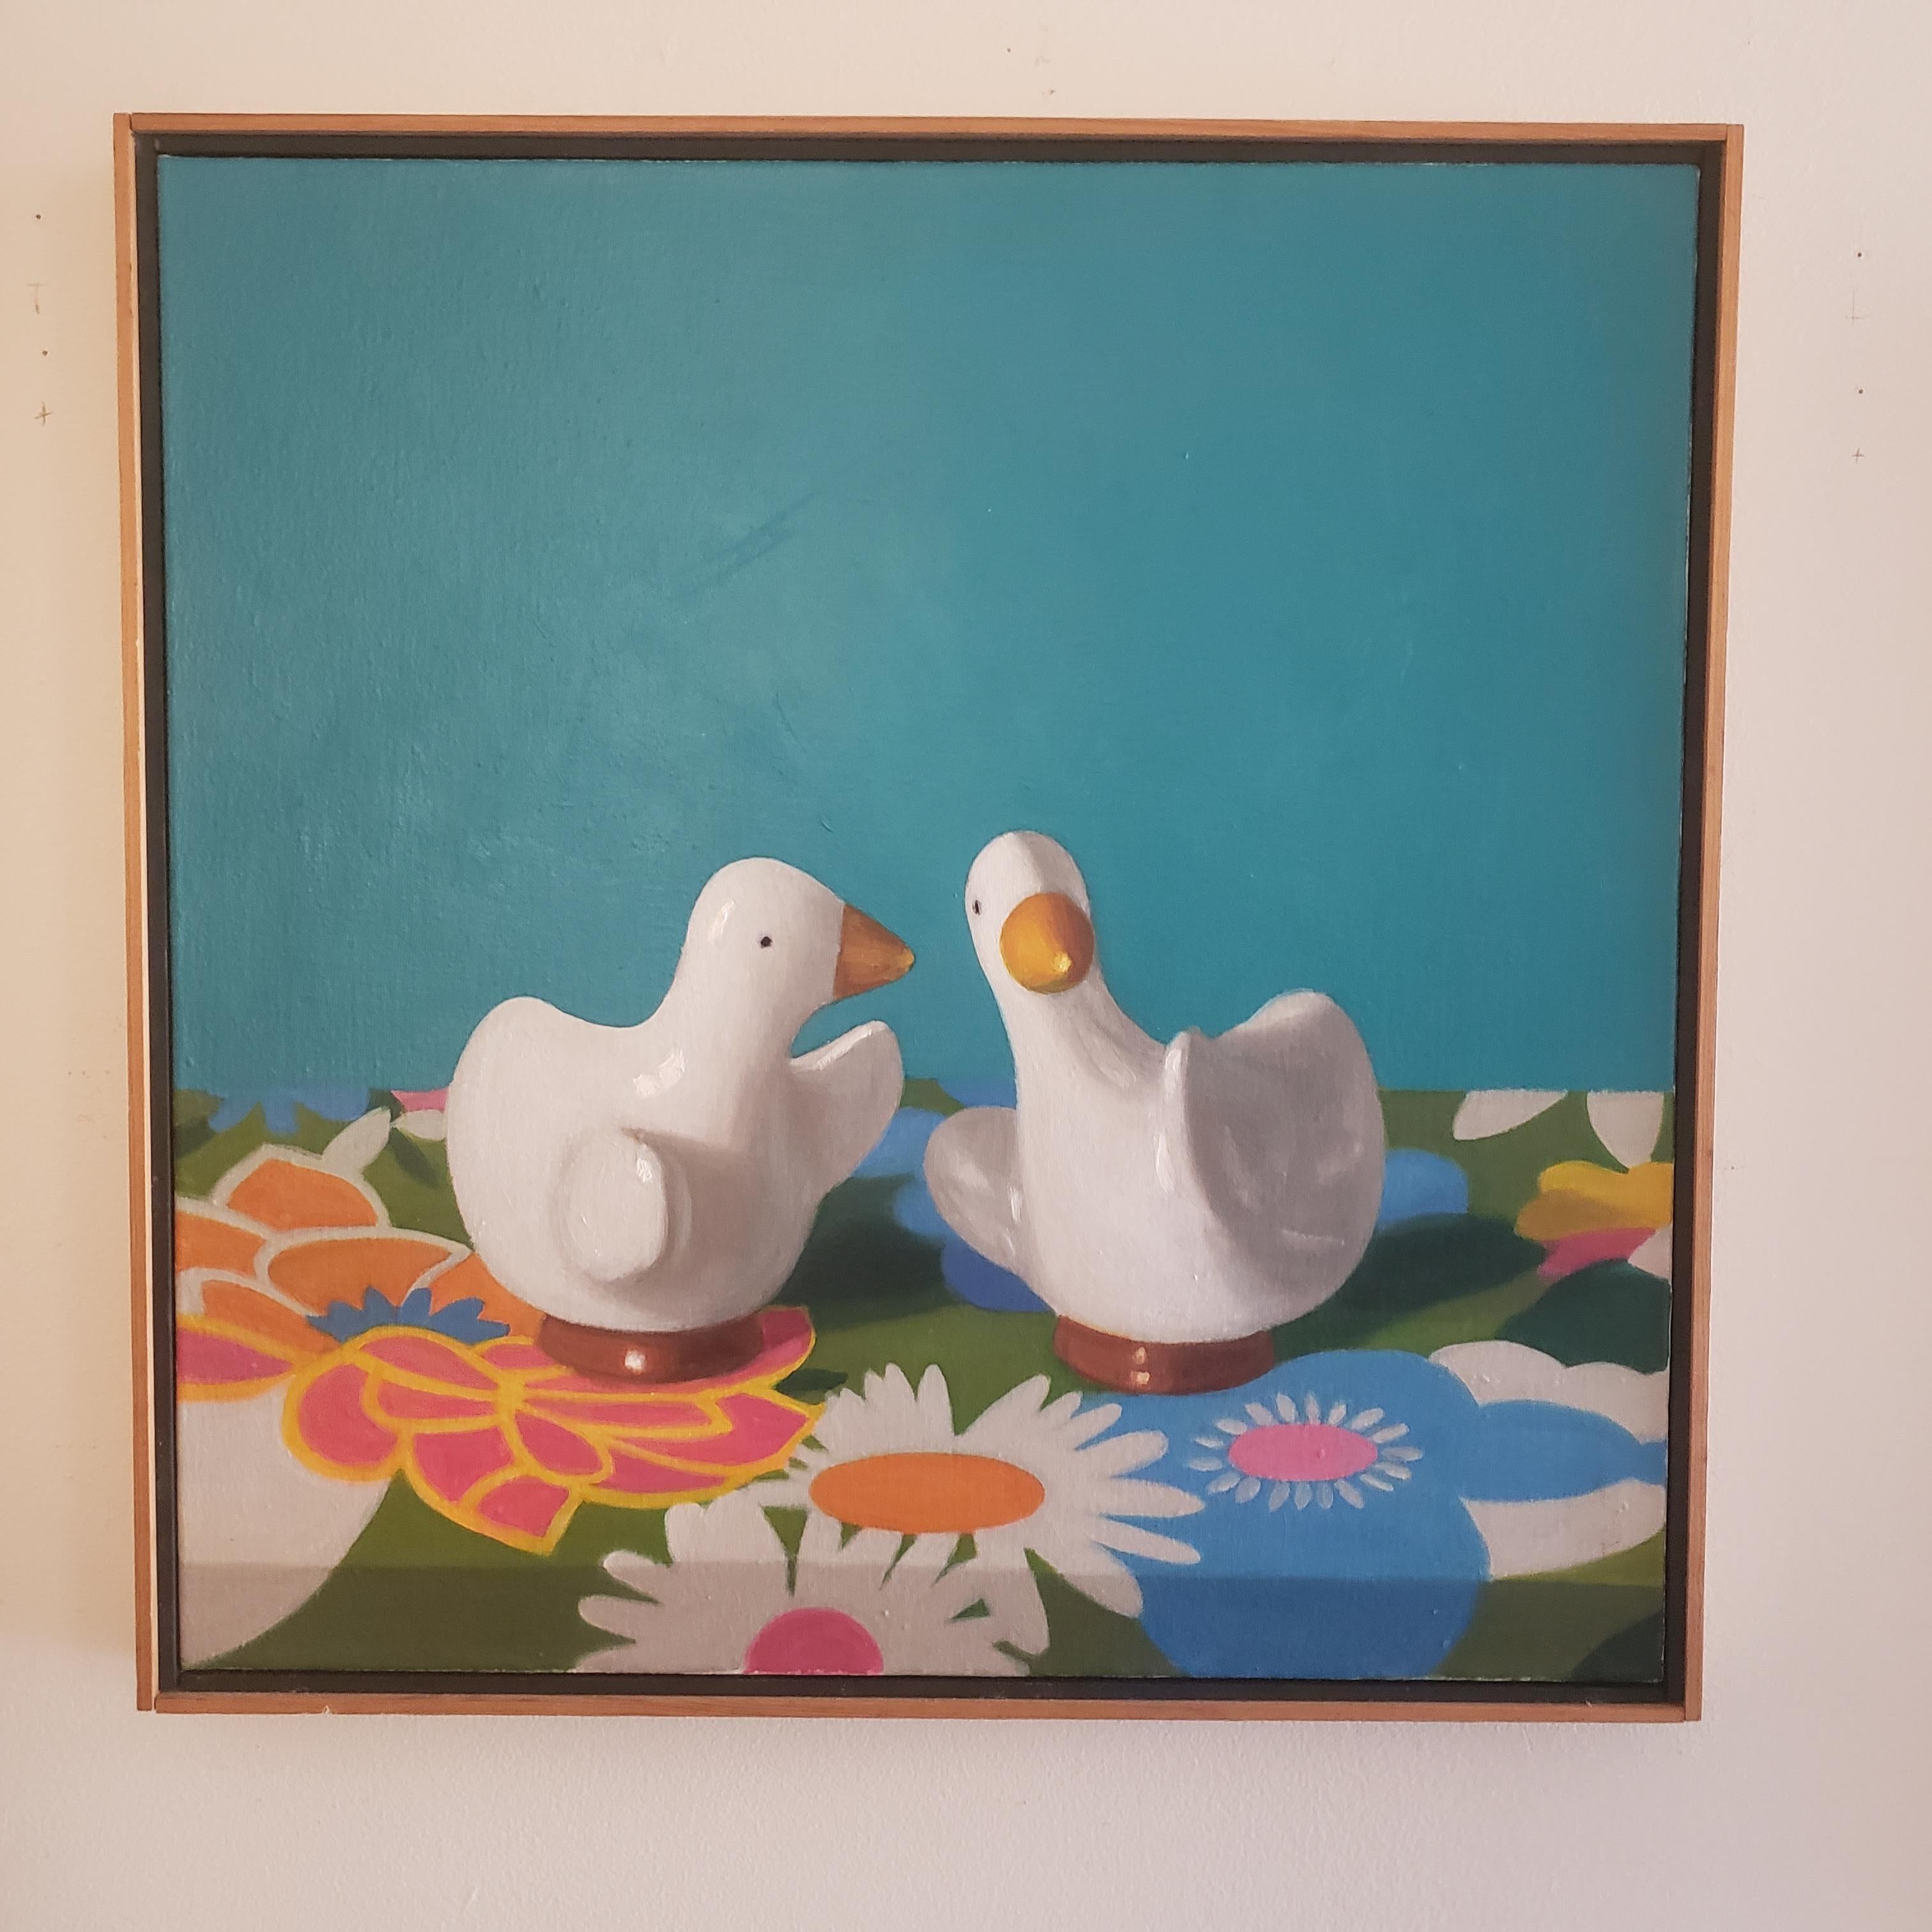  Marimekko Ducks, Oil Canvas, American Art, Realism, Tchotskes Quirky Objects - Painting by MAUREEN O'CONNER